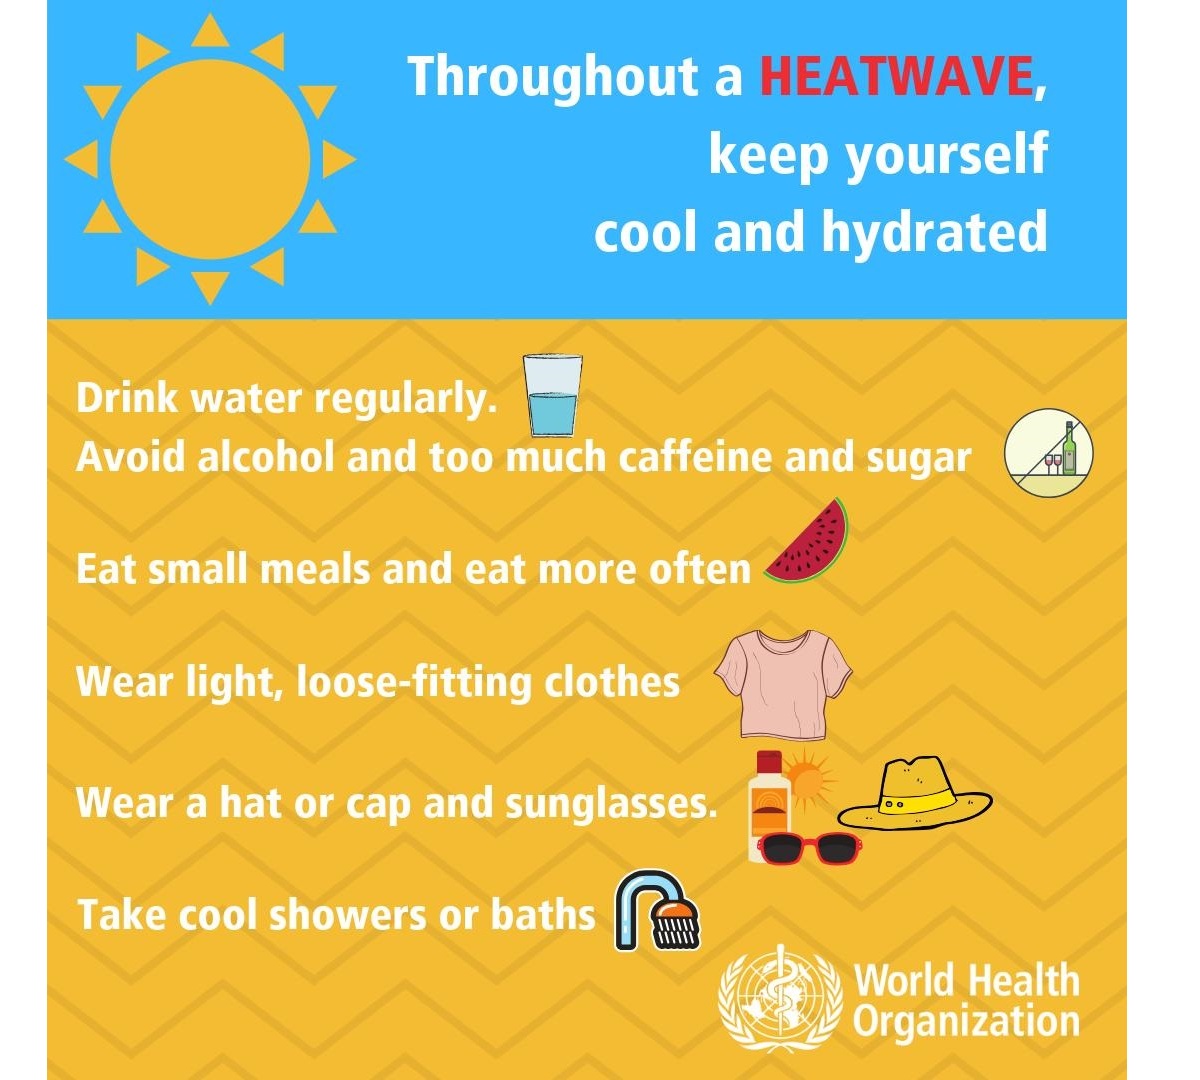 heatwave-europe-heat-dome-spain-italy-greece-summer-2023-keep-yourself-cool-and-hydrated